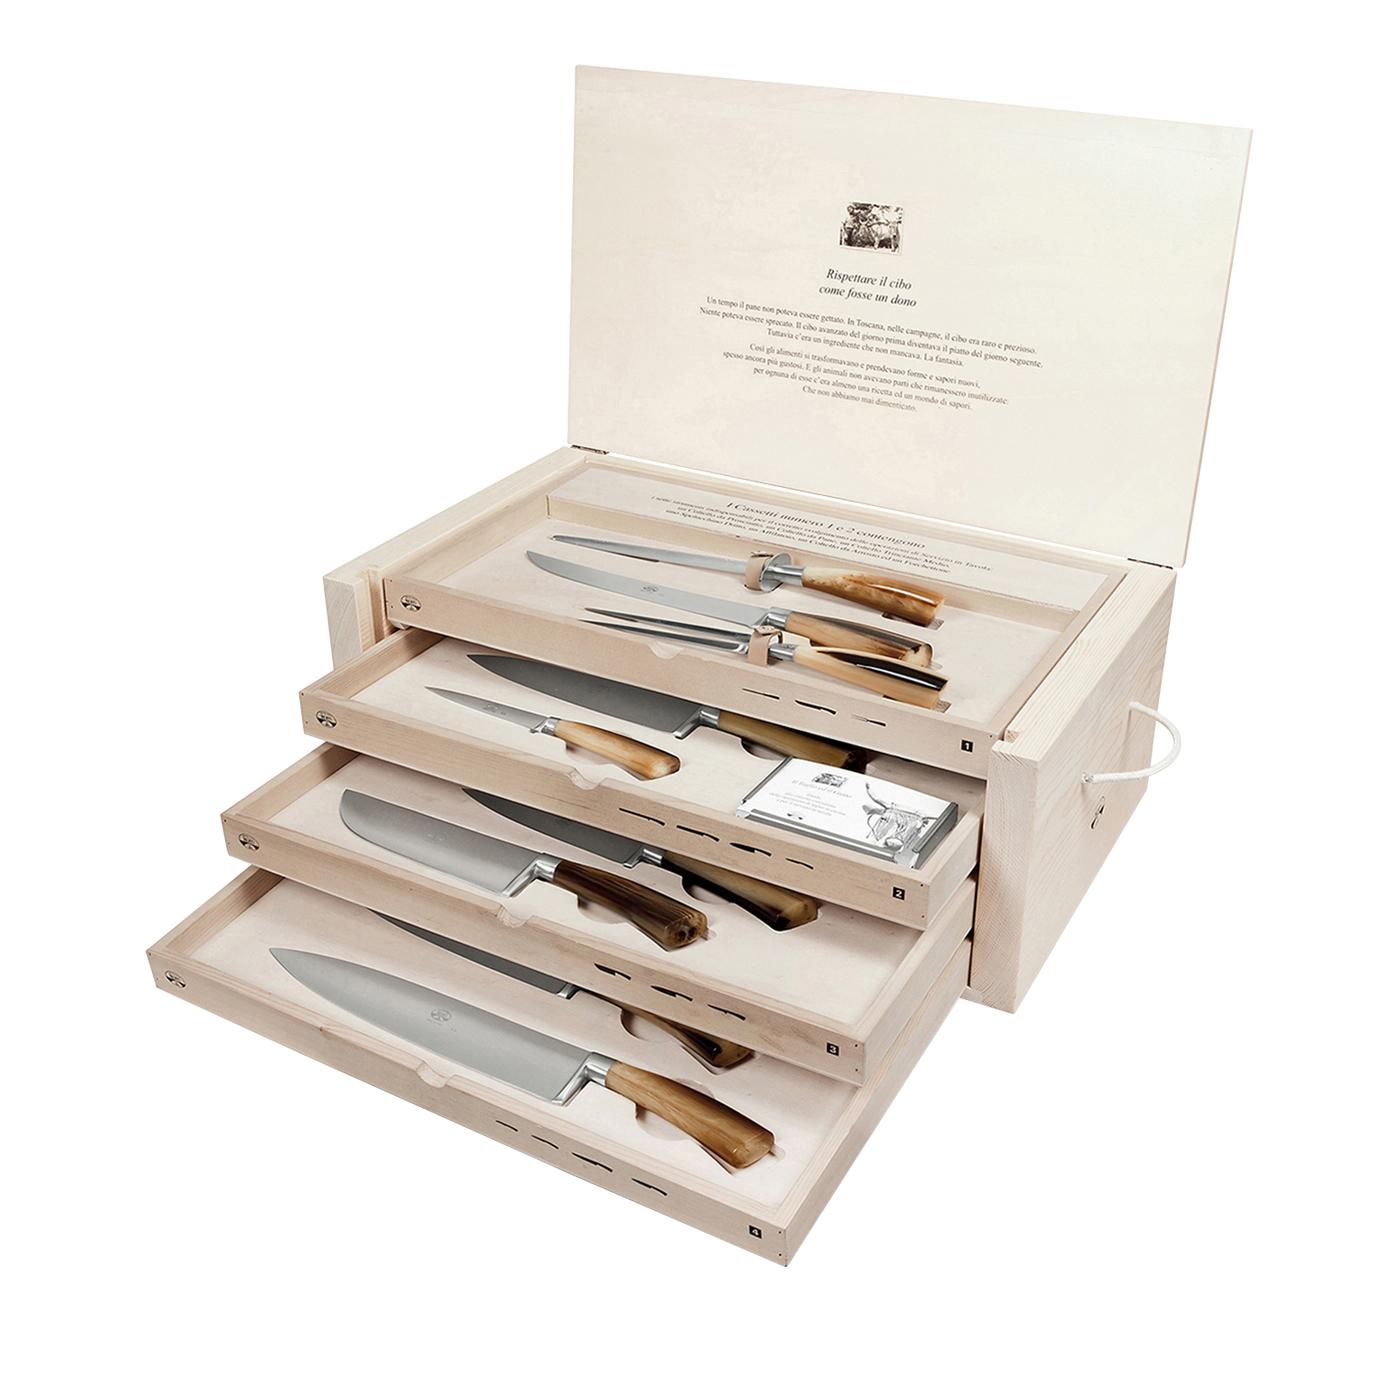 Modern Il Trinciante Complete Set of Knives with Cornotech Handle by Coltellerie Berti